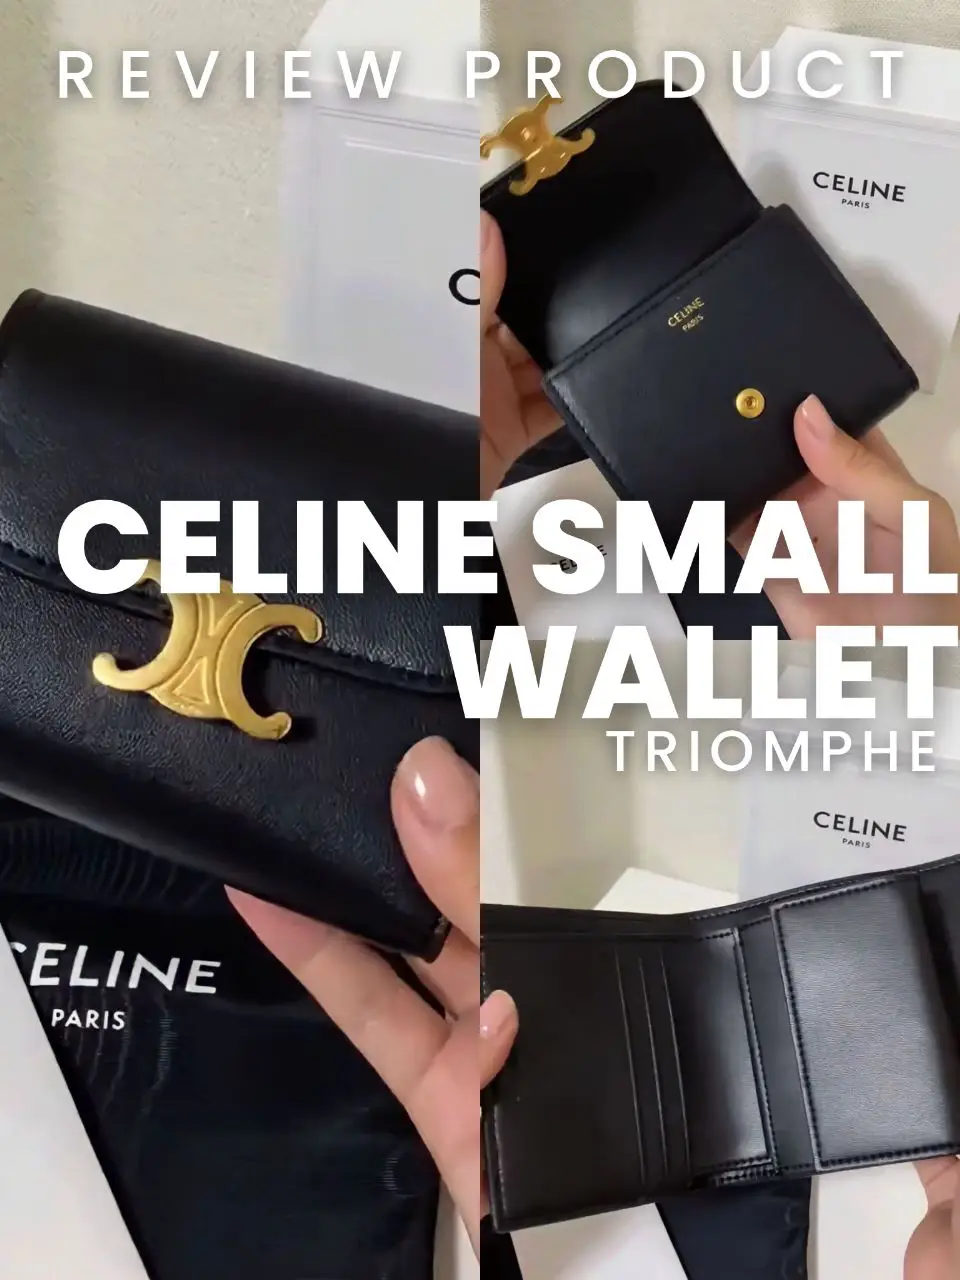 Review celine small wallet triomphe!, Gallery posted by @raamlpppp